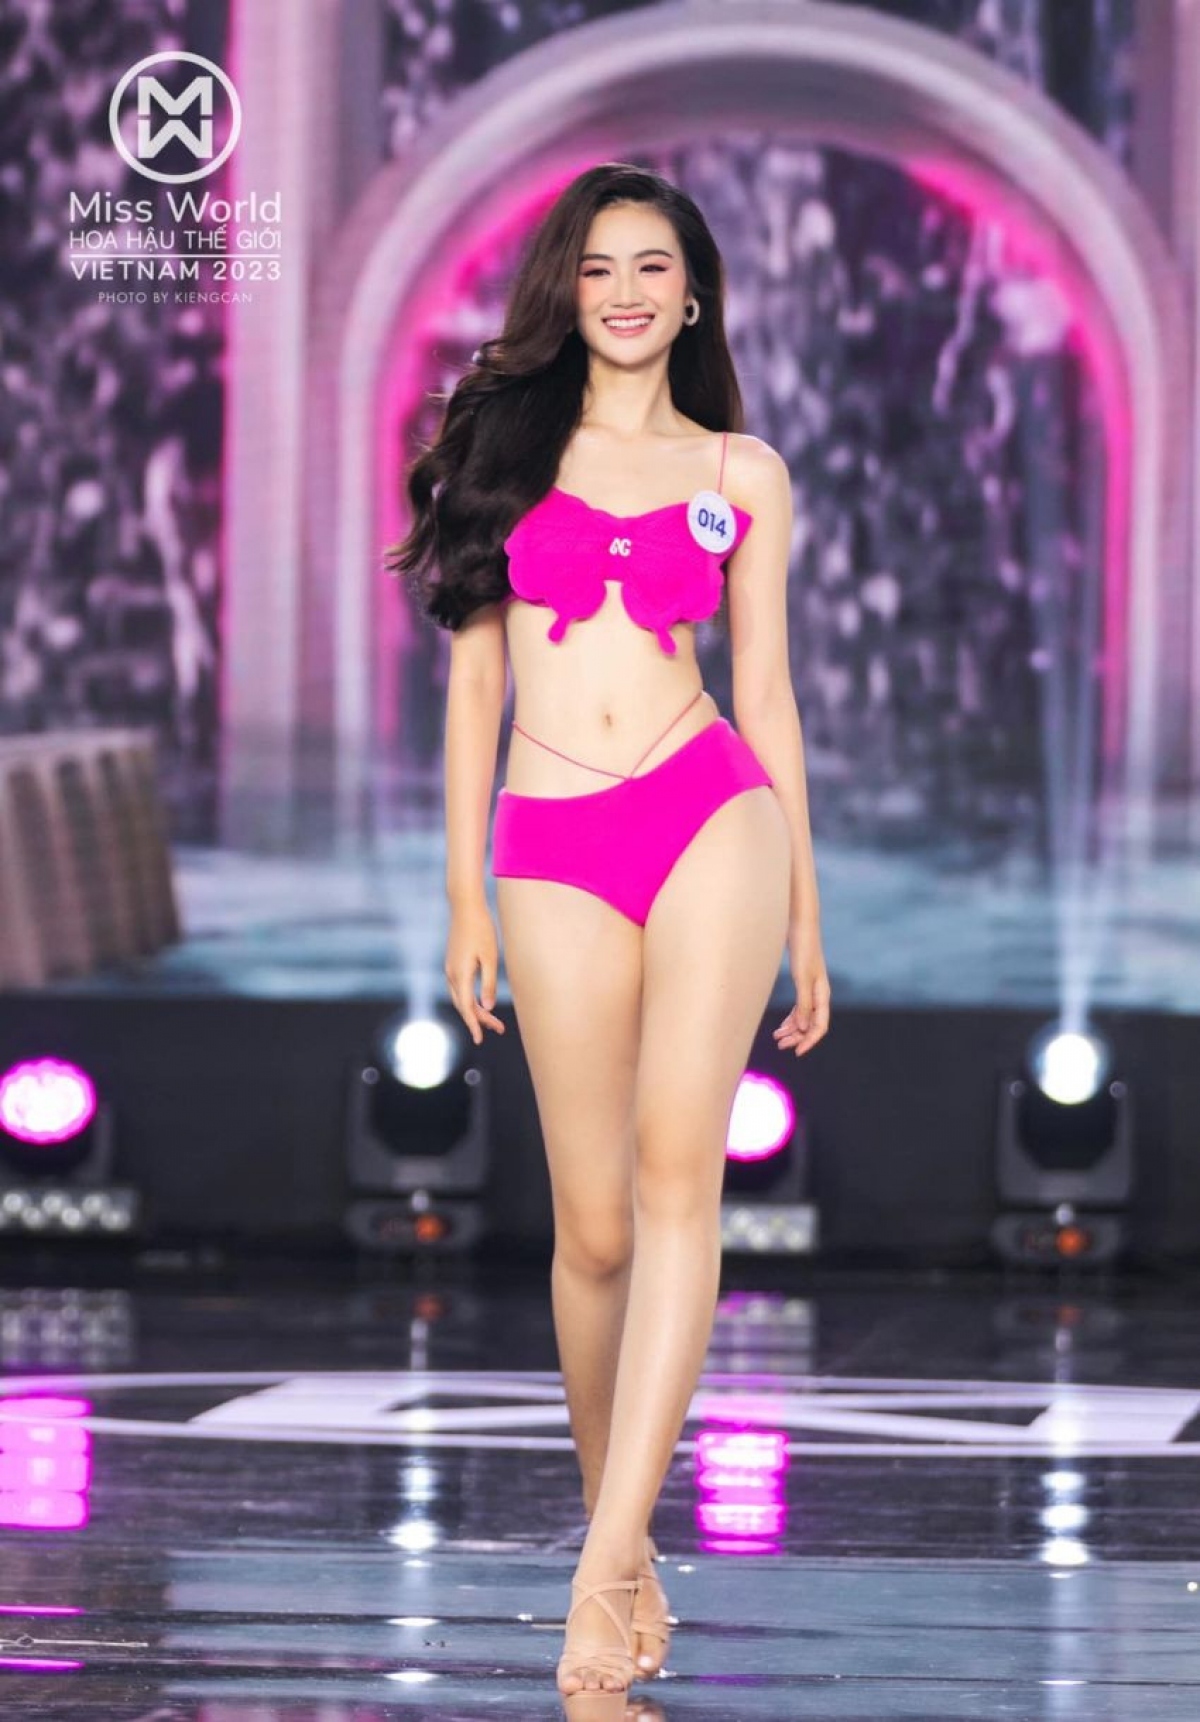 huynh tran y nhi crowned miss world vietnam 2023 picture 8